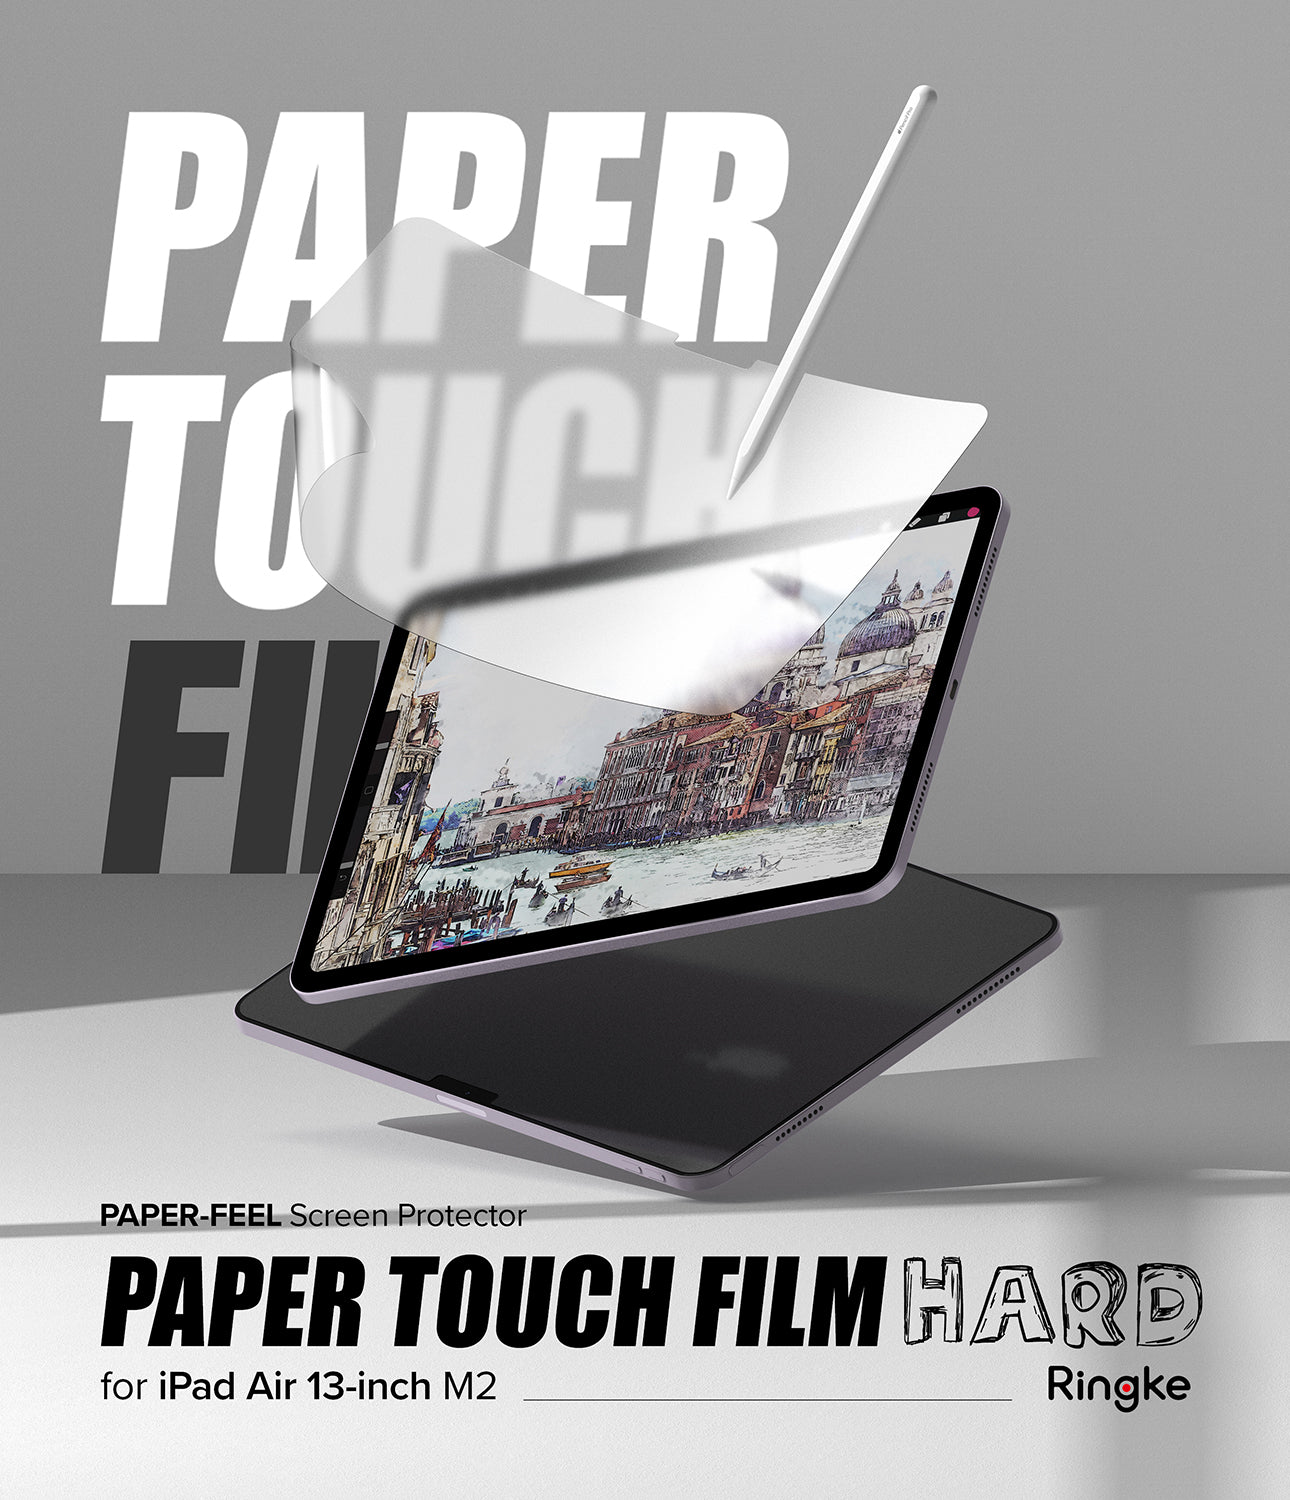 iPad Air 13" (M2) Screen Protector | Paper Touch Film - Hard - By Ringke